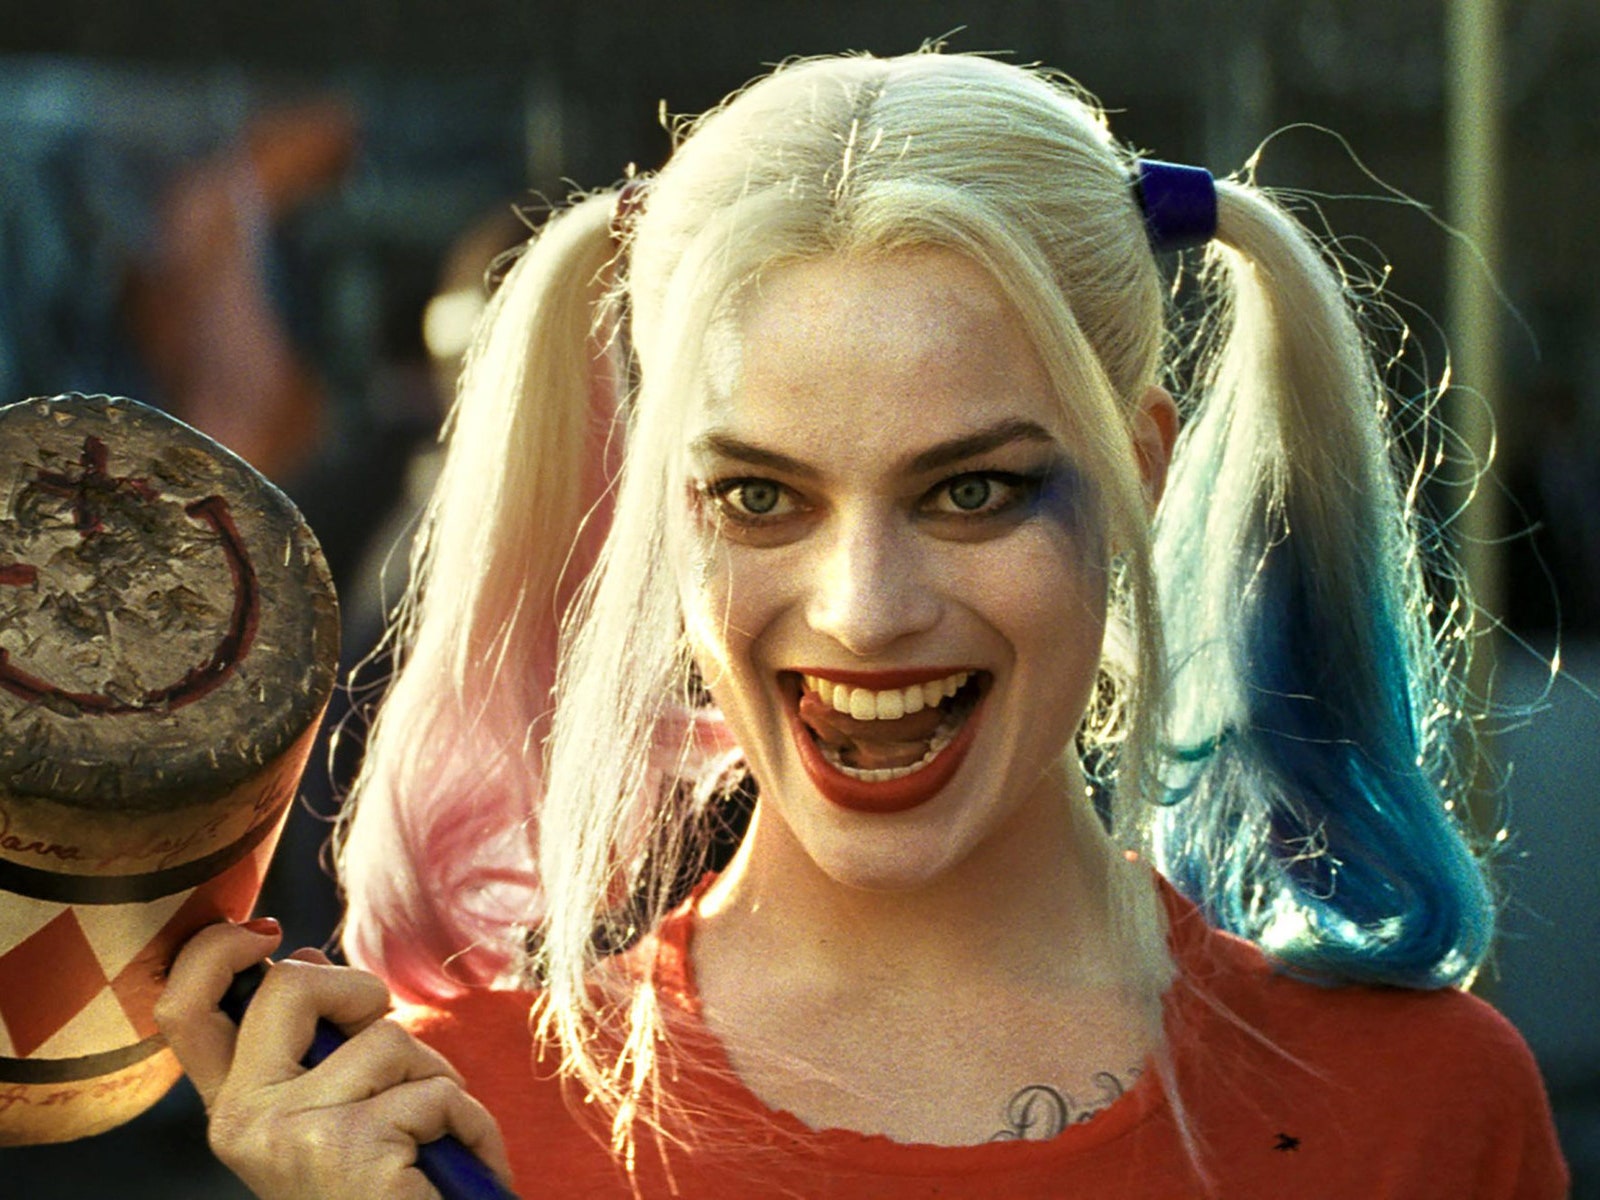 damian phipps share google show me a picture of harley quinn photos